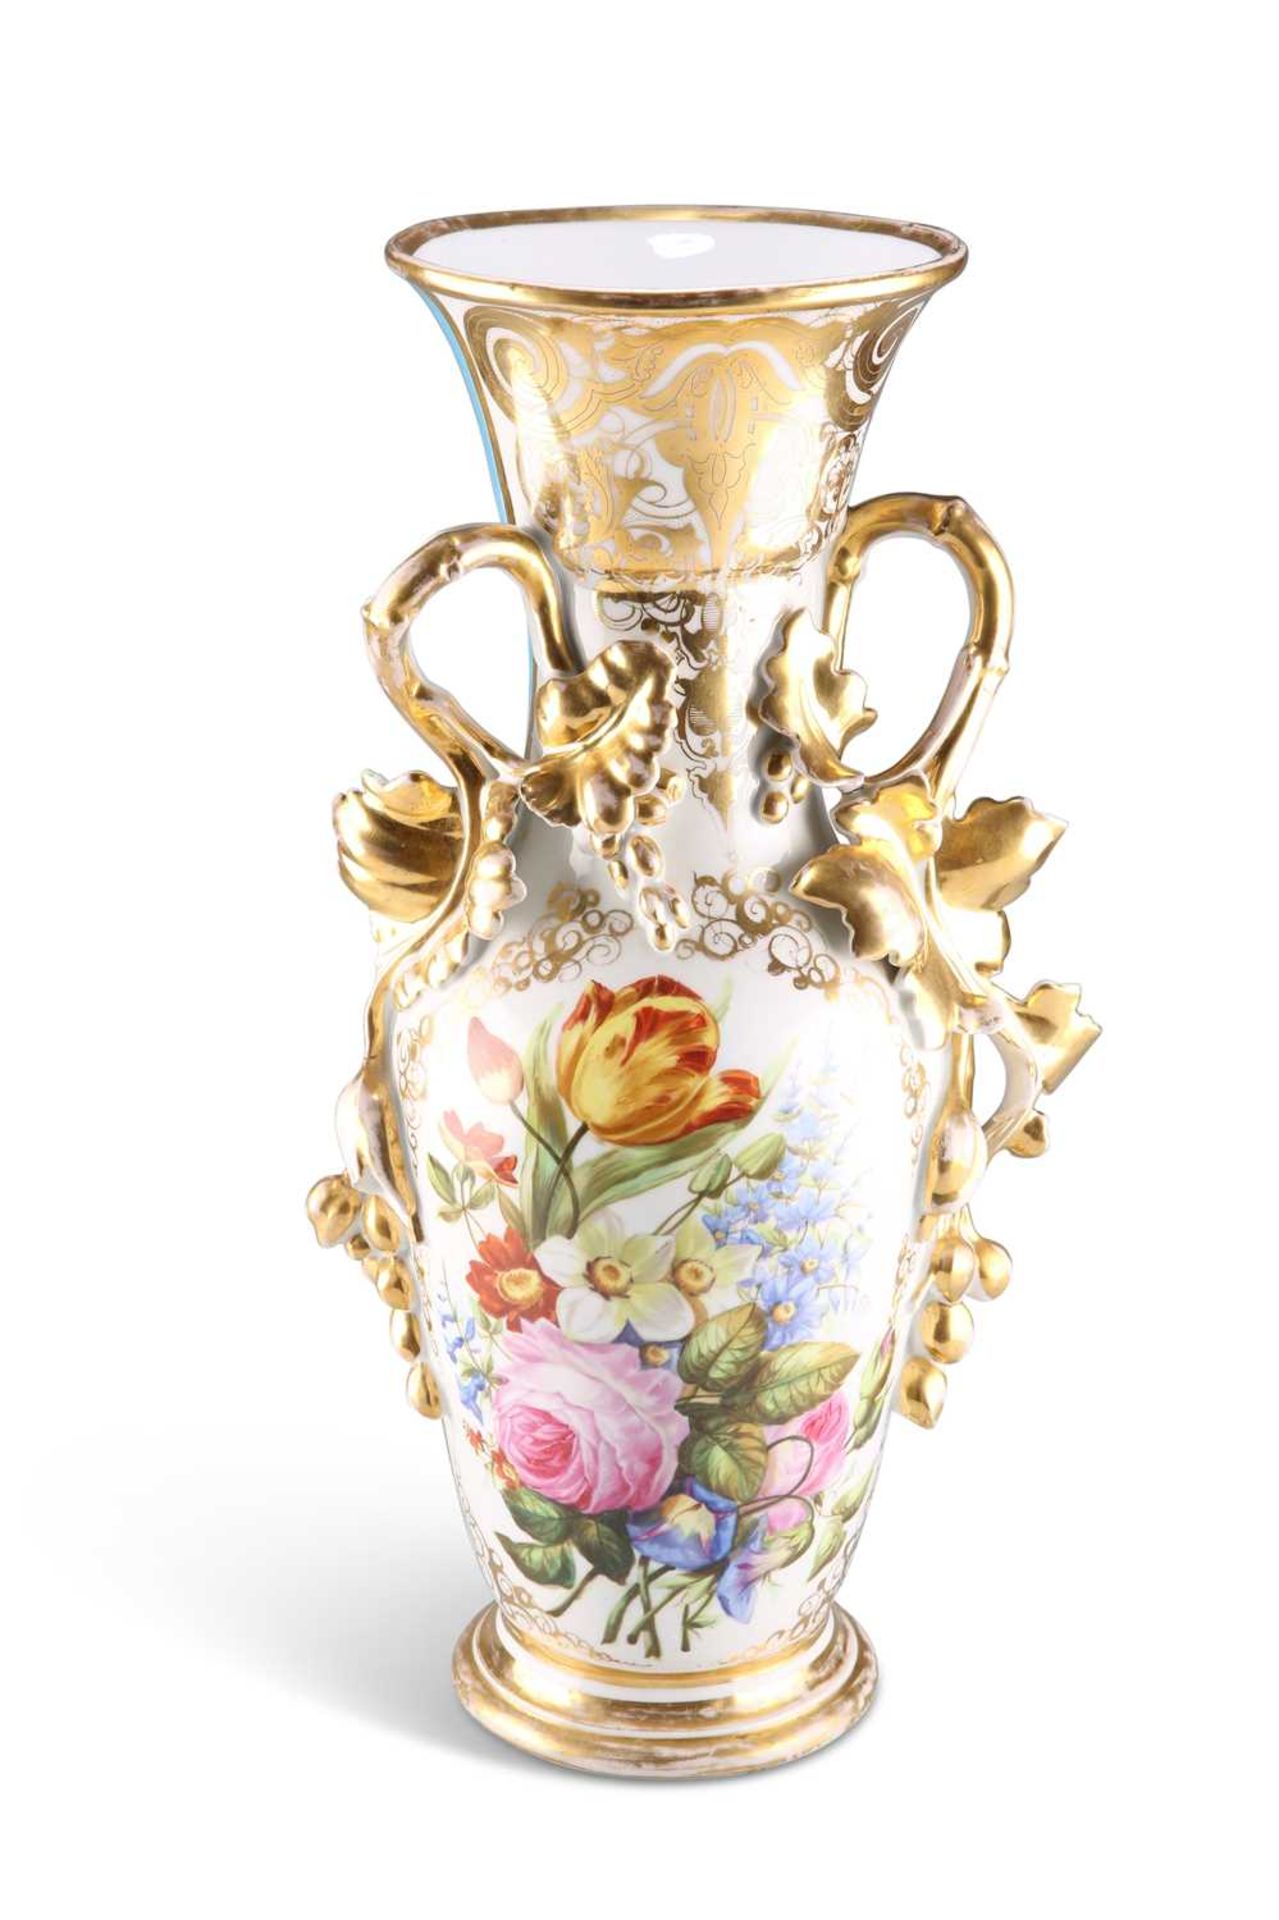 A FRENCH PORCELAIN VASE, MID-19TH CENTURY